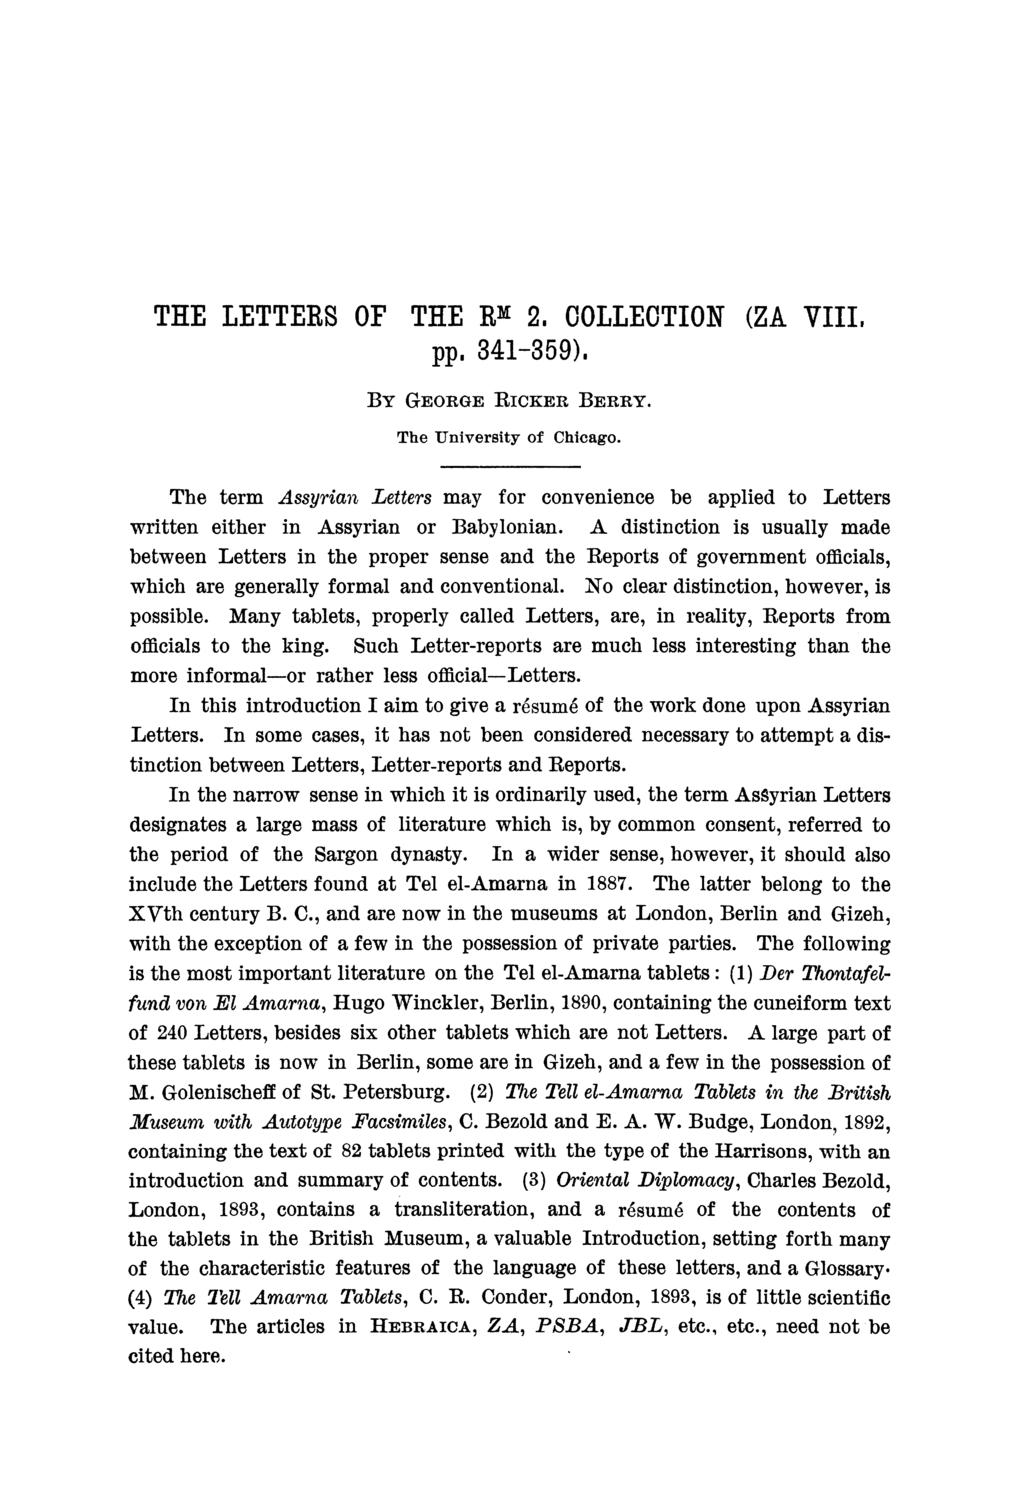 THE LETTERS OF THE RM COLLECTION (ZA VIII, 2, pp, 341-359), BY GEORGE RICKER BERRY. The University of Chicago.